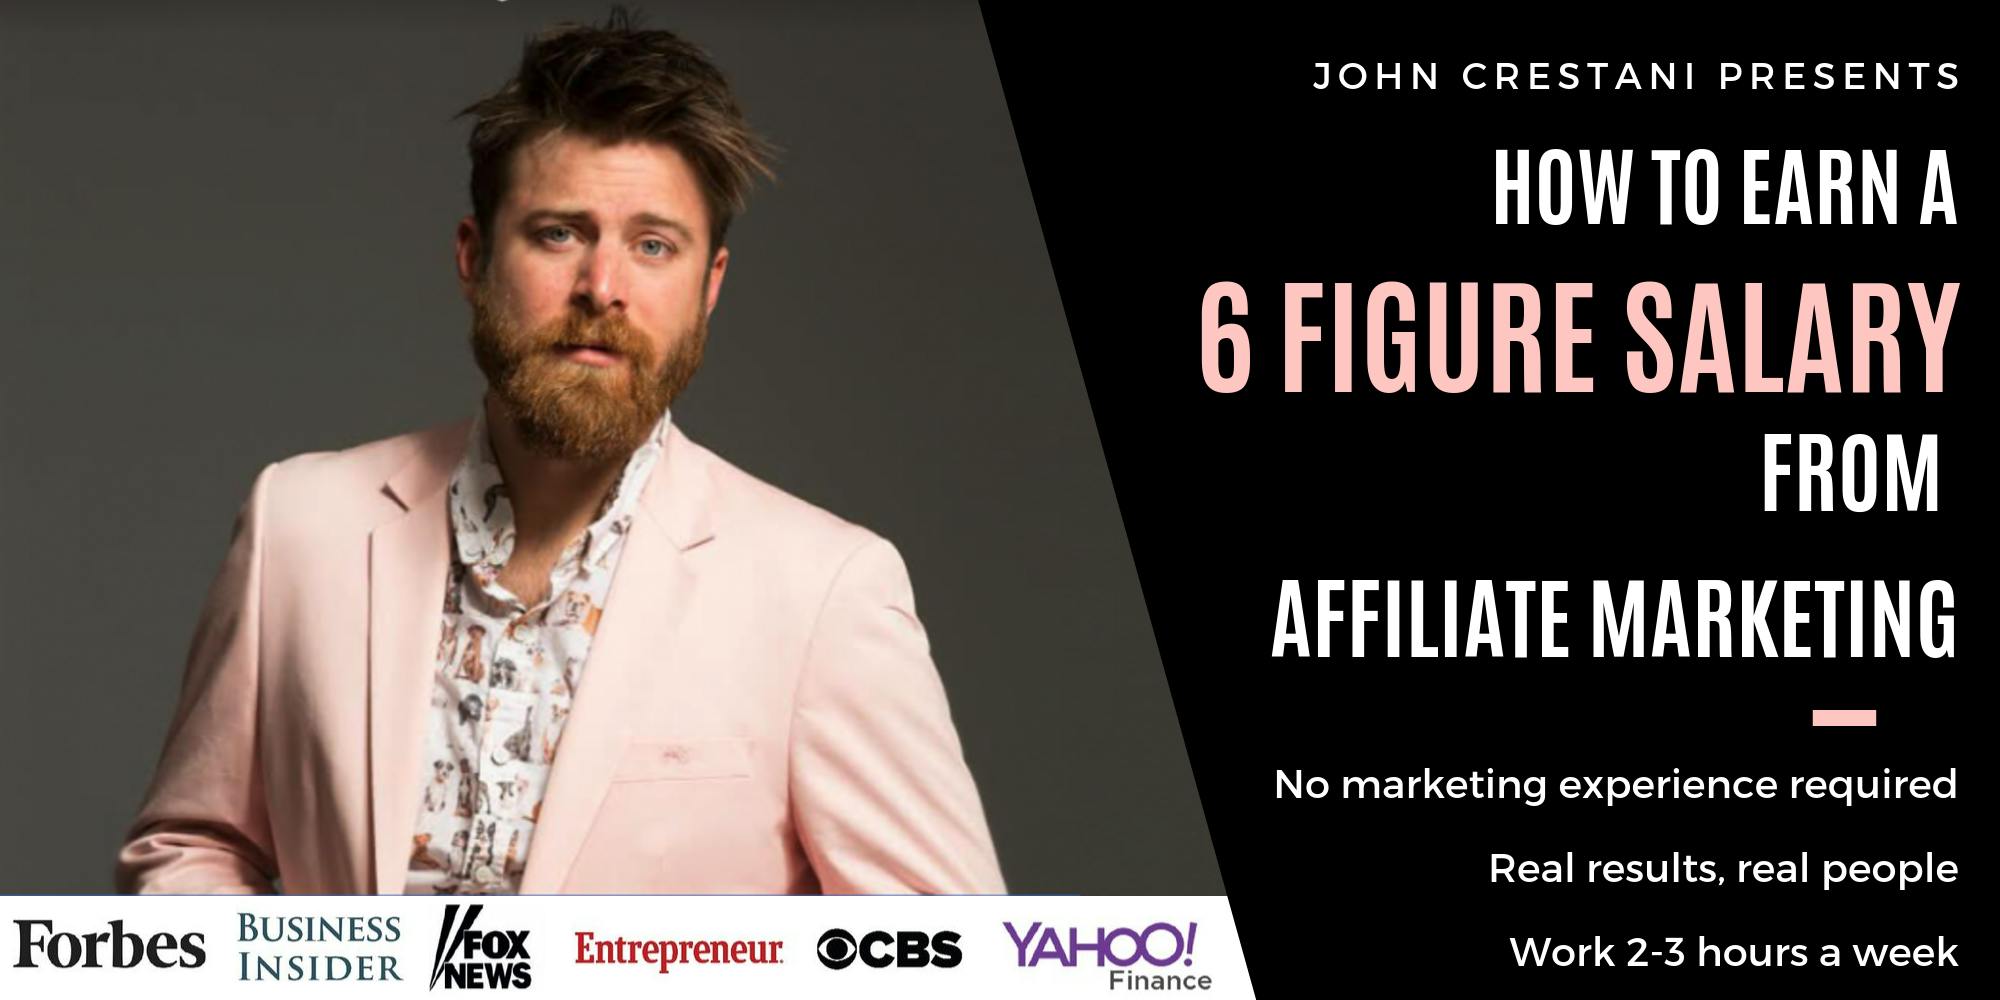 FREE Event - How to Earn 6 Figures with Affiliate Marketing, 2-3 Hours Work p/w [WEBINAR]